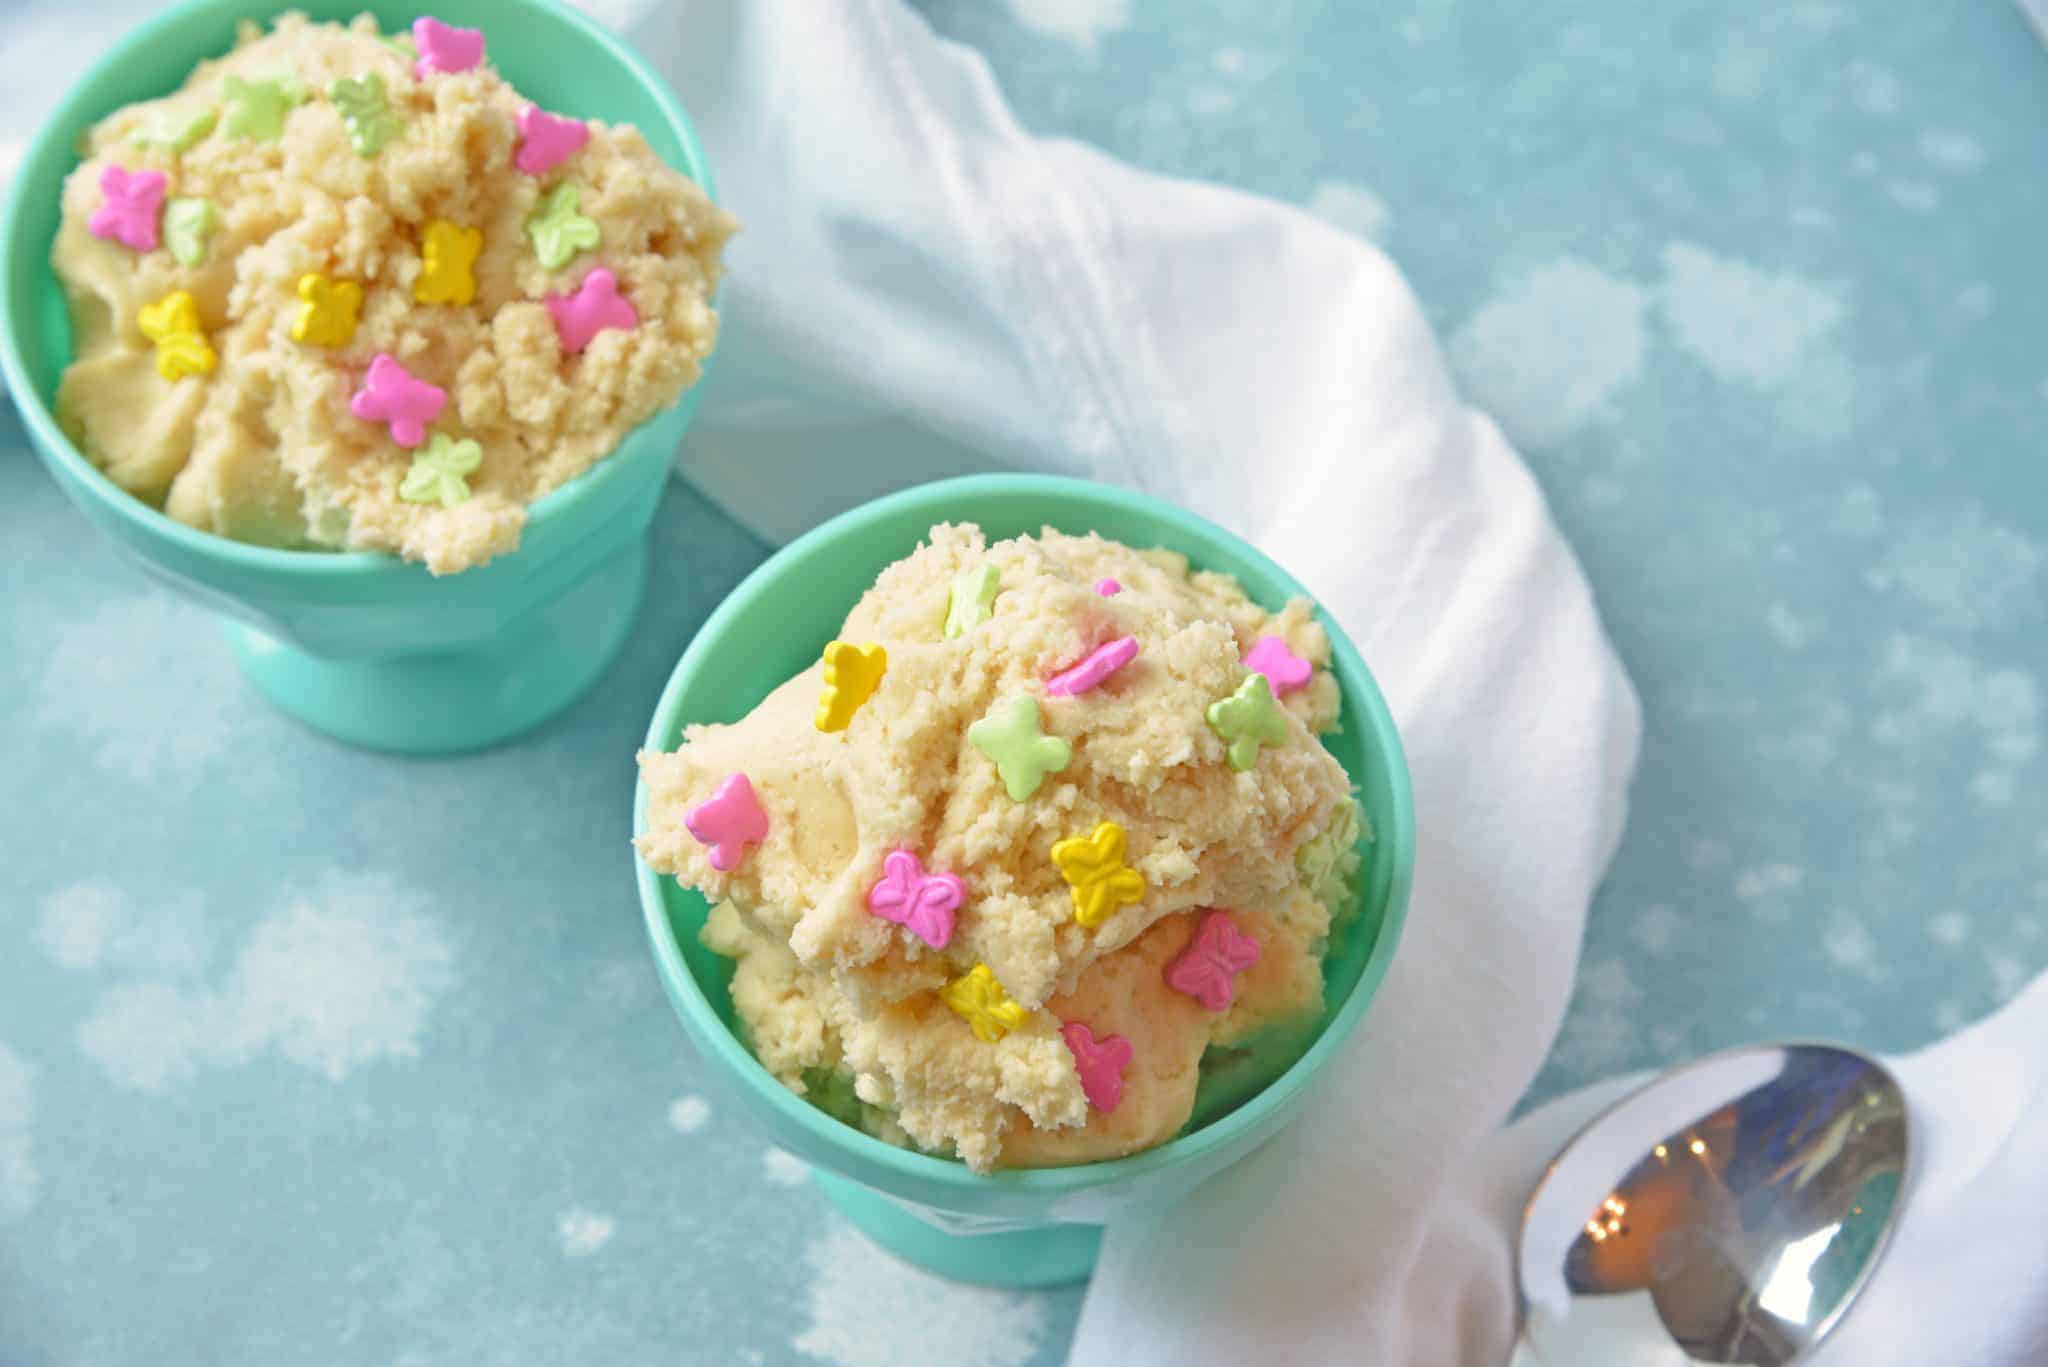 Desserts for one don't get easier than this edible sugar cookie dough.  With only a few ingredients, it's an easy dessert when you need a little pick me up! #ediblecookiedough #howtomakeediblecookiedough #ediblesugarcookiedough www.savoryexperiments.com